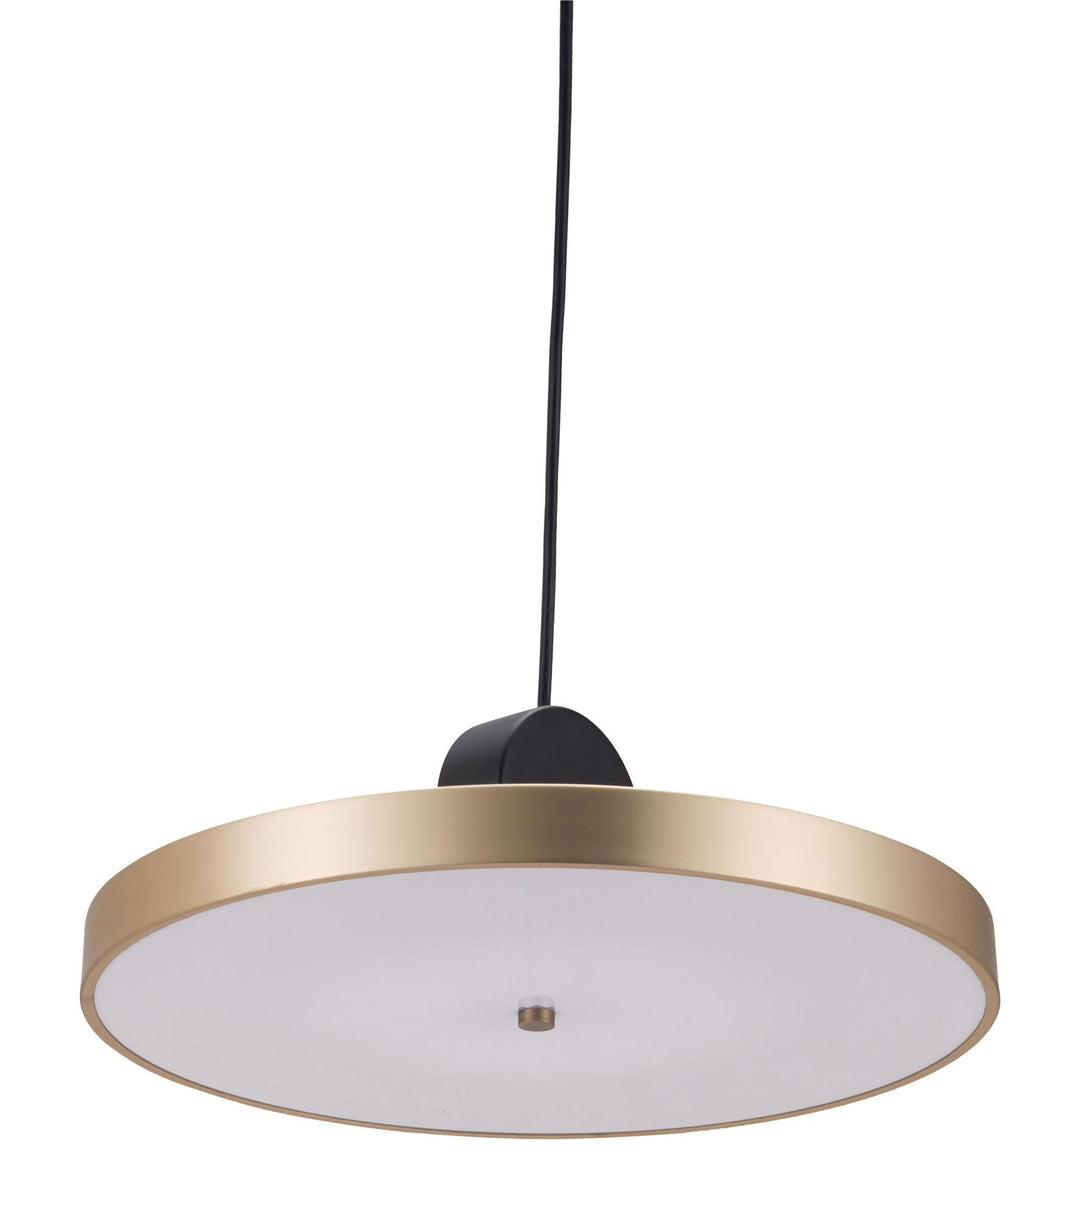 Nadia Ceiling Lamp with Adjustable Cord Length  -  N/A